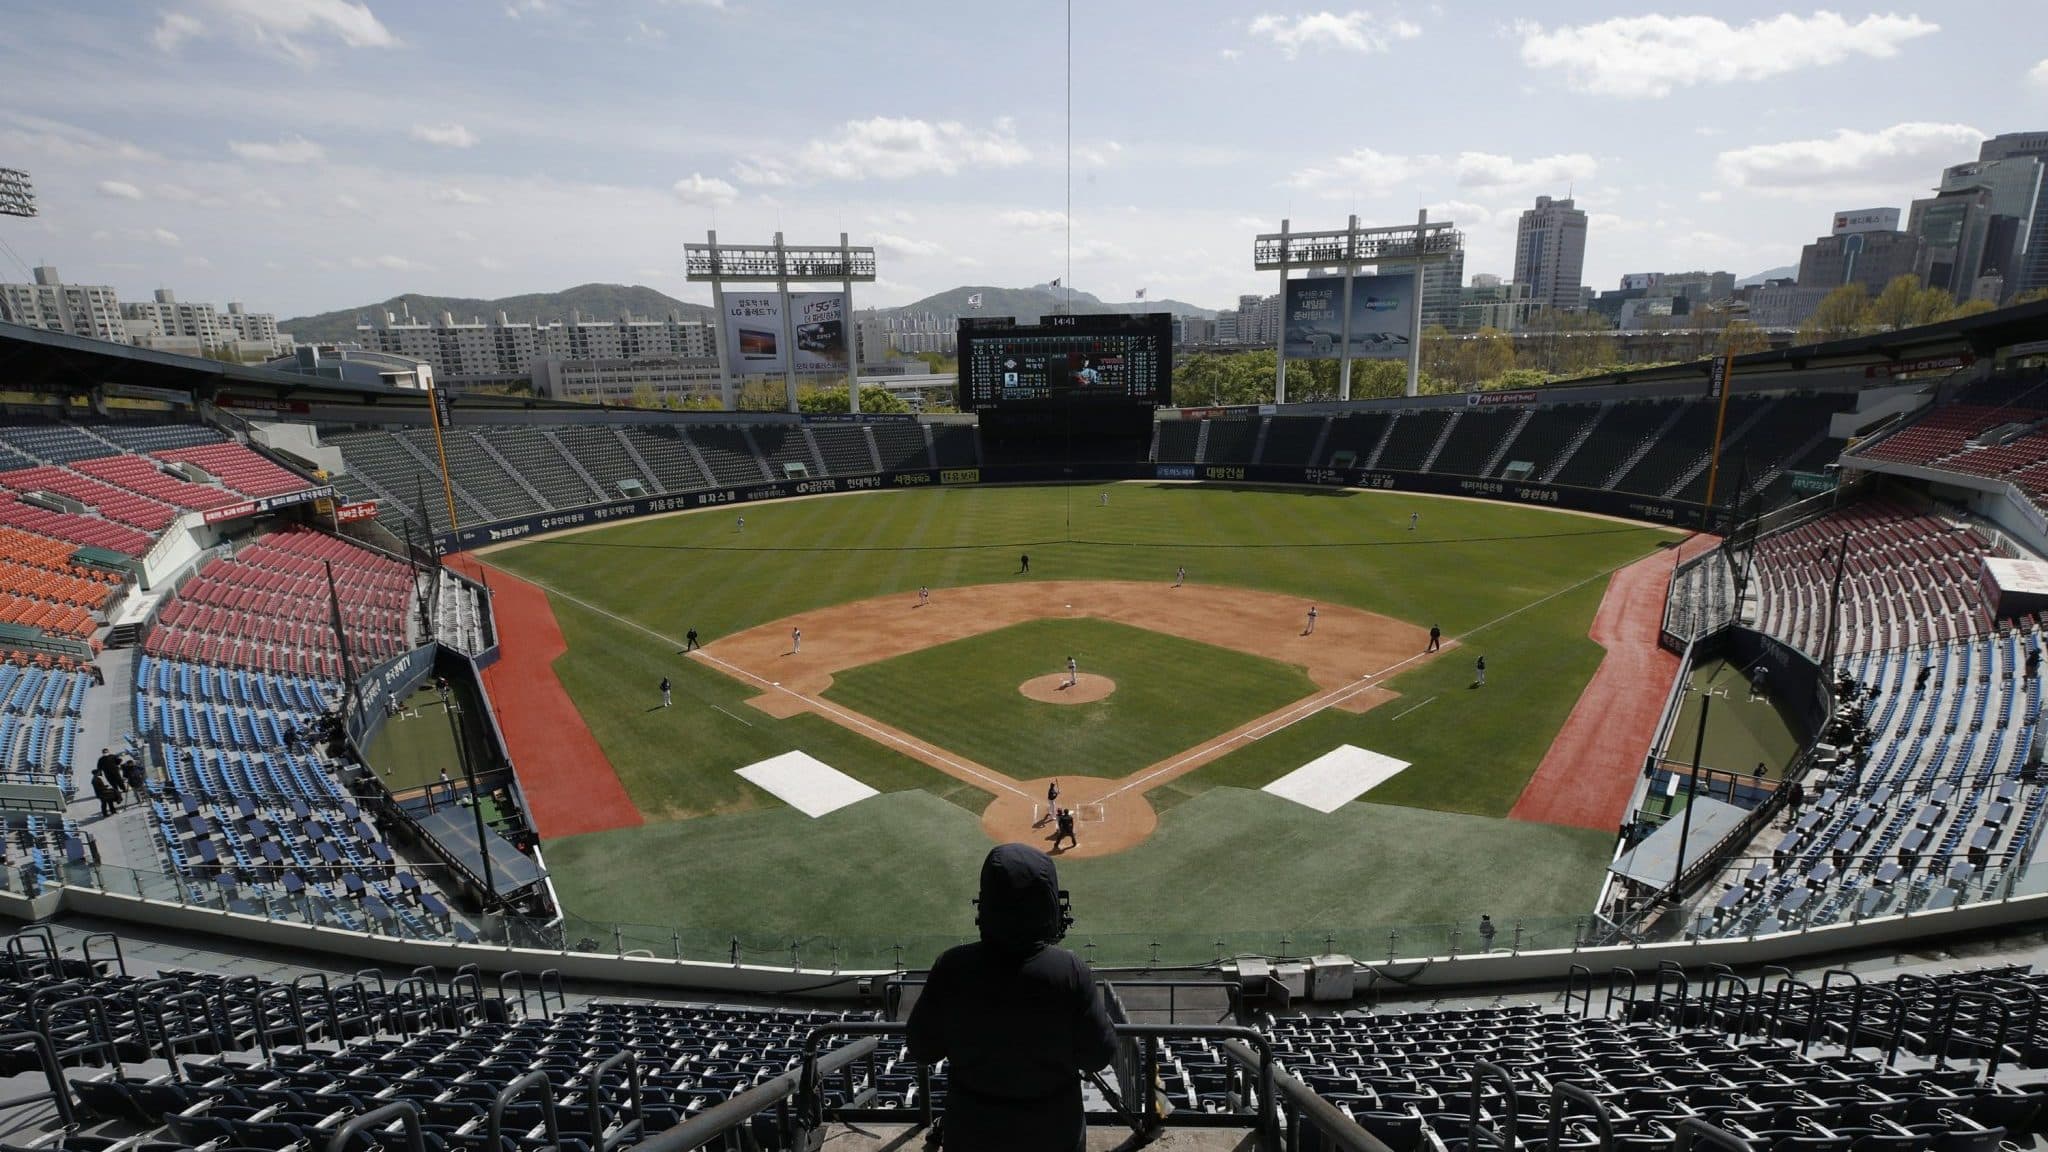 A TV cameraman films in the empty stadium as a part of precaution against the new coronavirus during the pre-season baseball game between Doosan Bears and LG Twins in Seoul, South Korea, Tuesday, April 21, 2020. South Korea's professional baseball league has decided to begin its new season on May 5, initially without fans, following a postponement over the coronavirus.